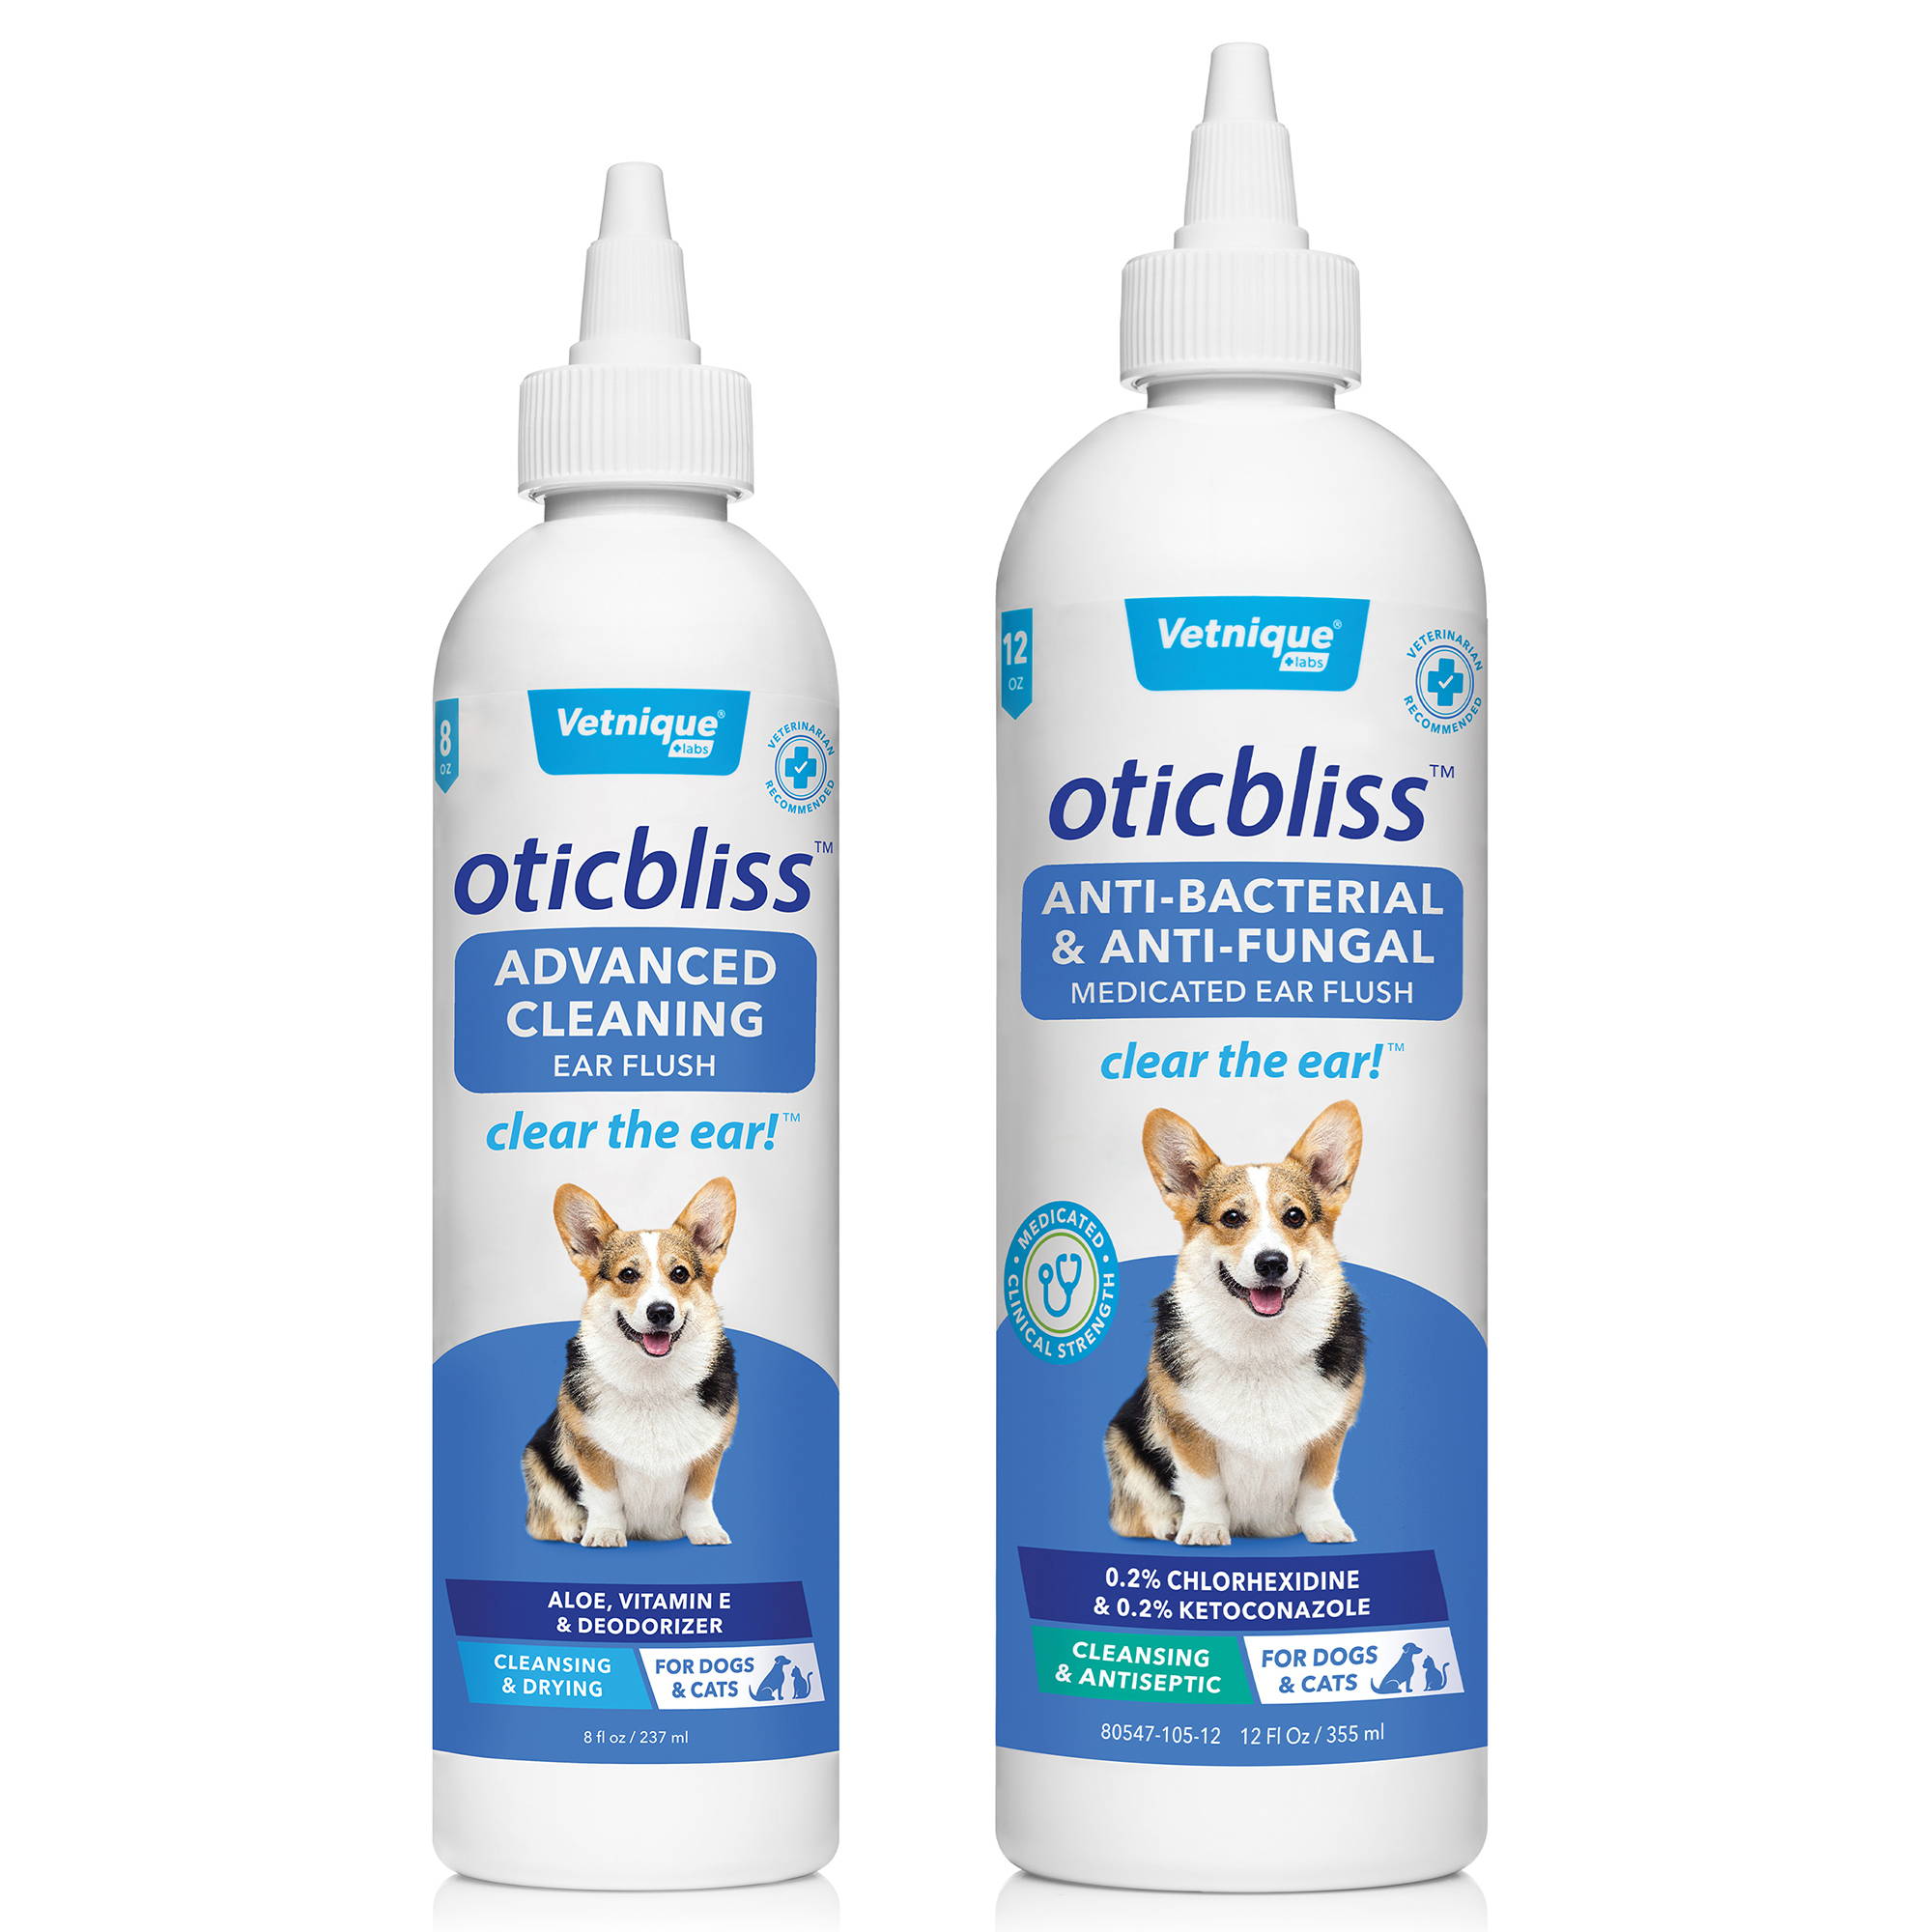 Oticbliss Dog and Cat Ear Flush